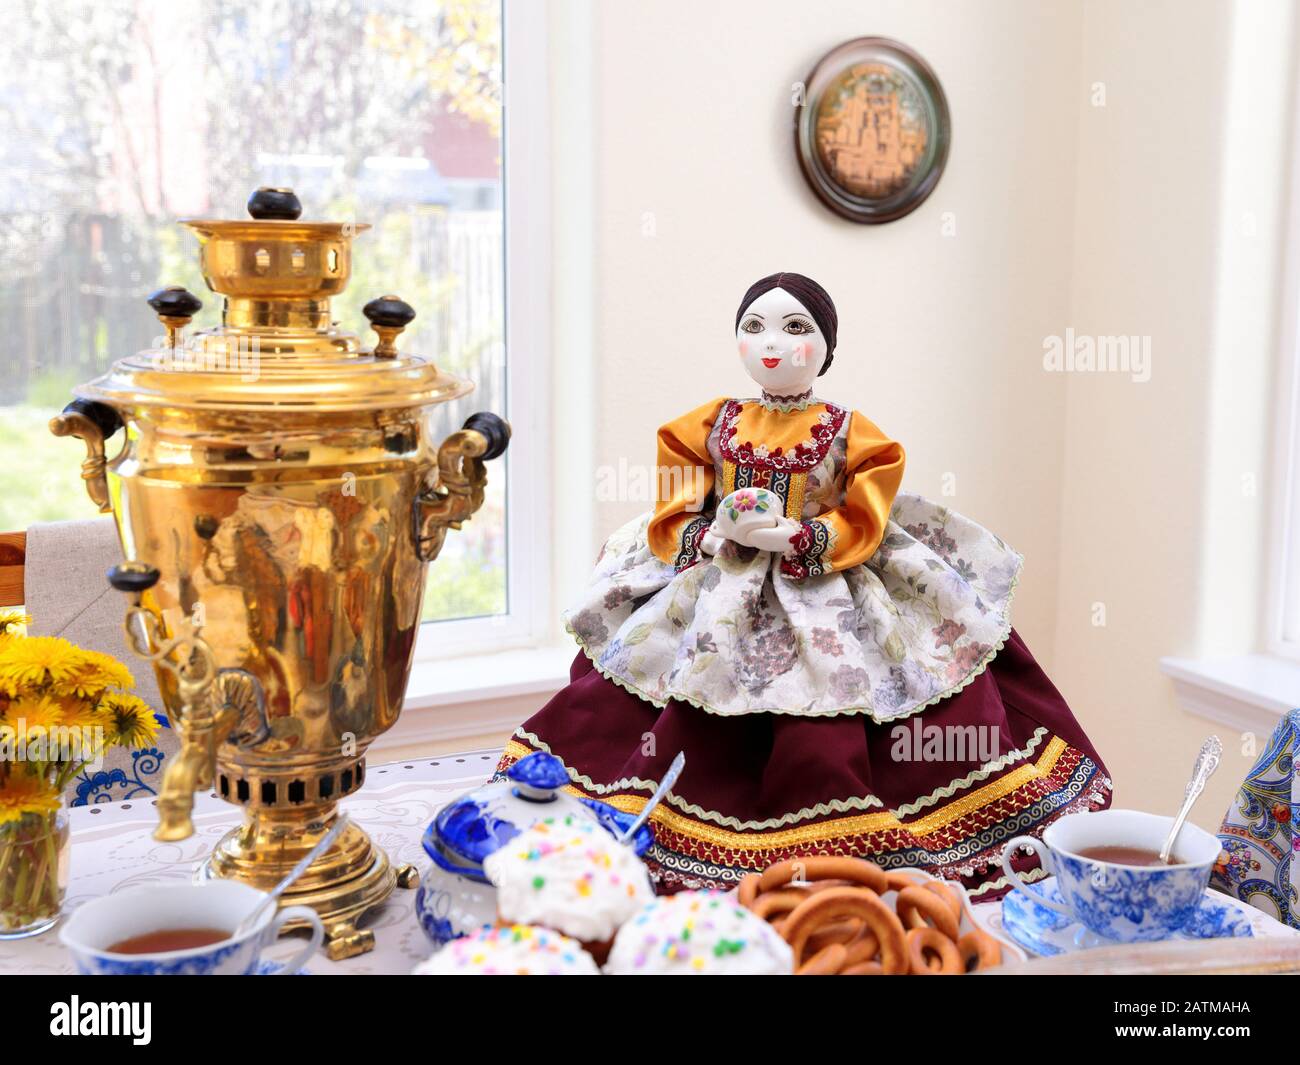 Hillsboro, OR  USA - 15 April 2017: A large decorative tea warmer in a form of a doll in traditional Russia dress holding teacup standing next to a Stock Photo